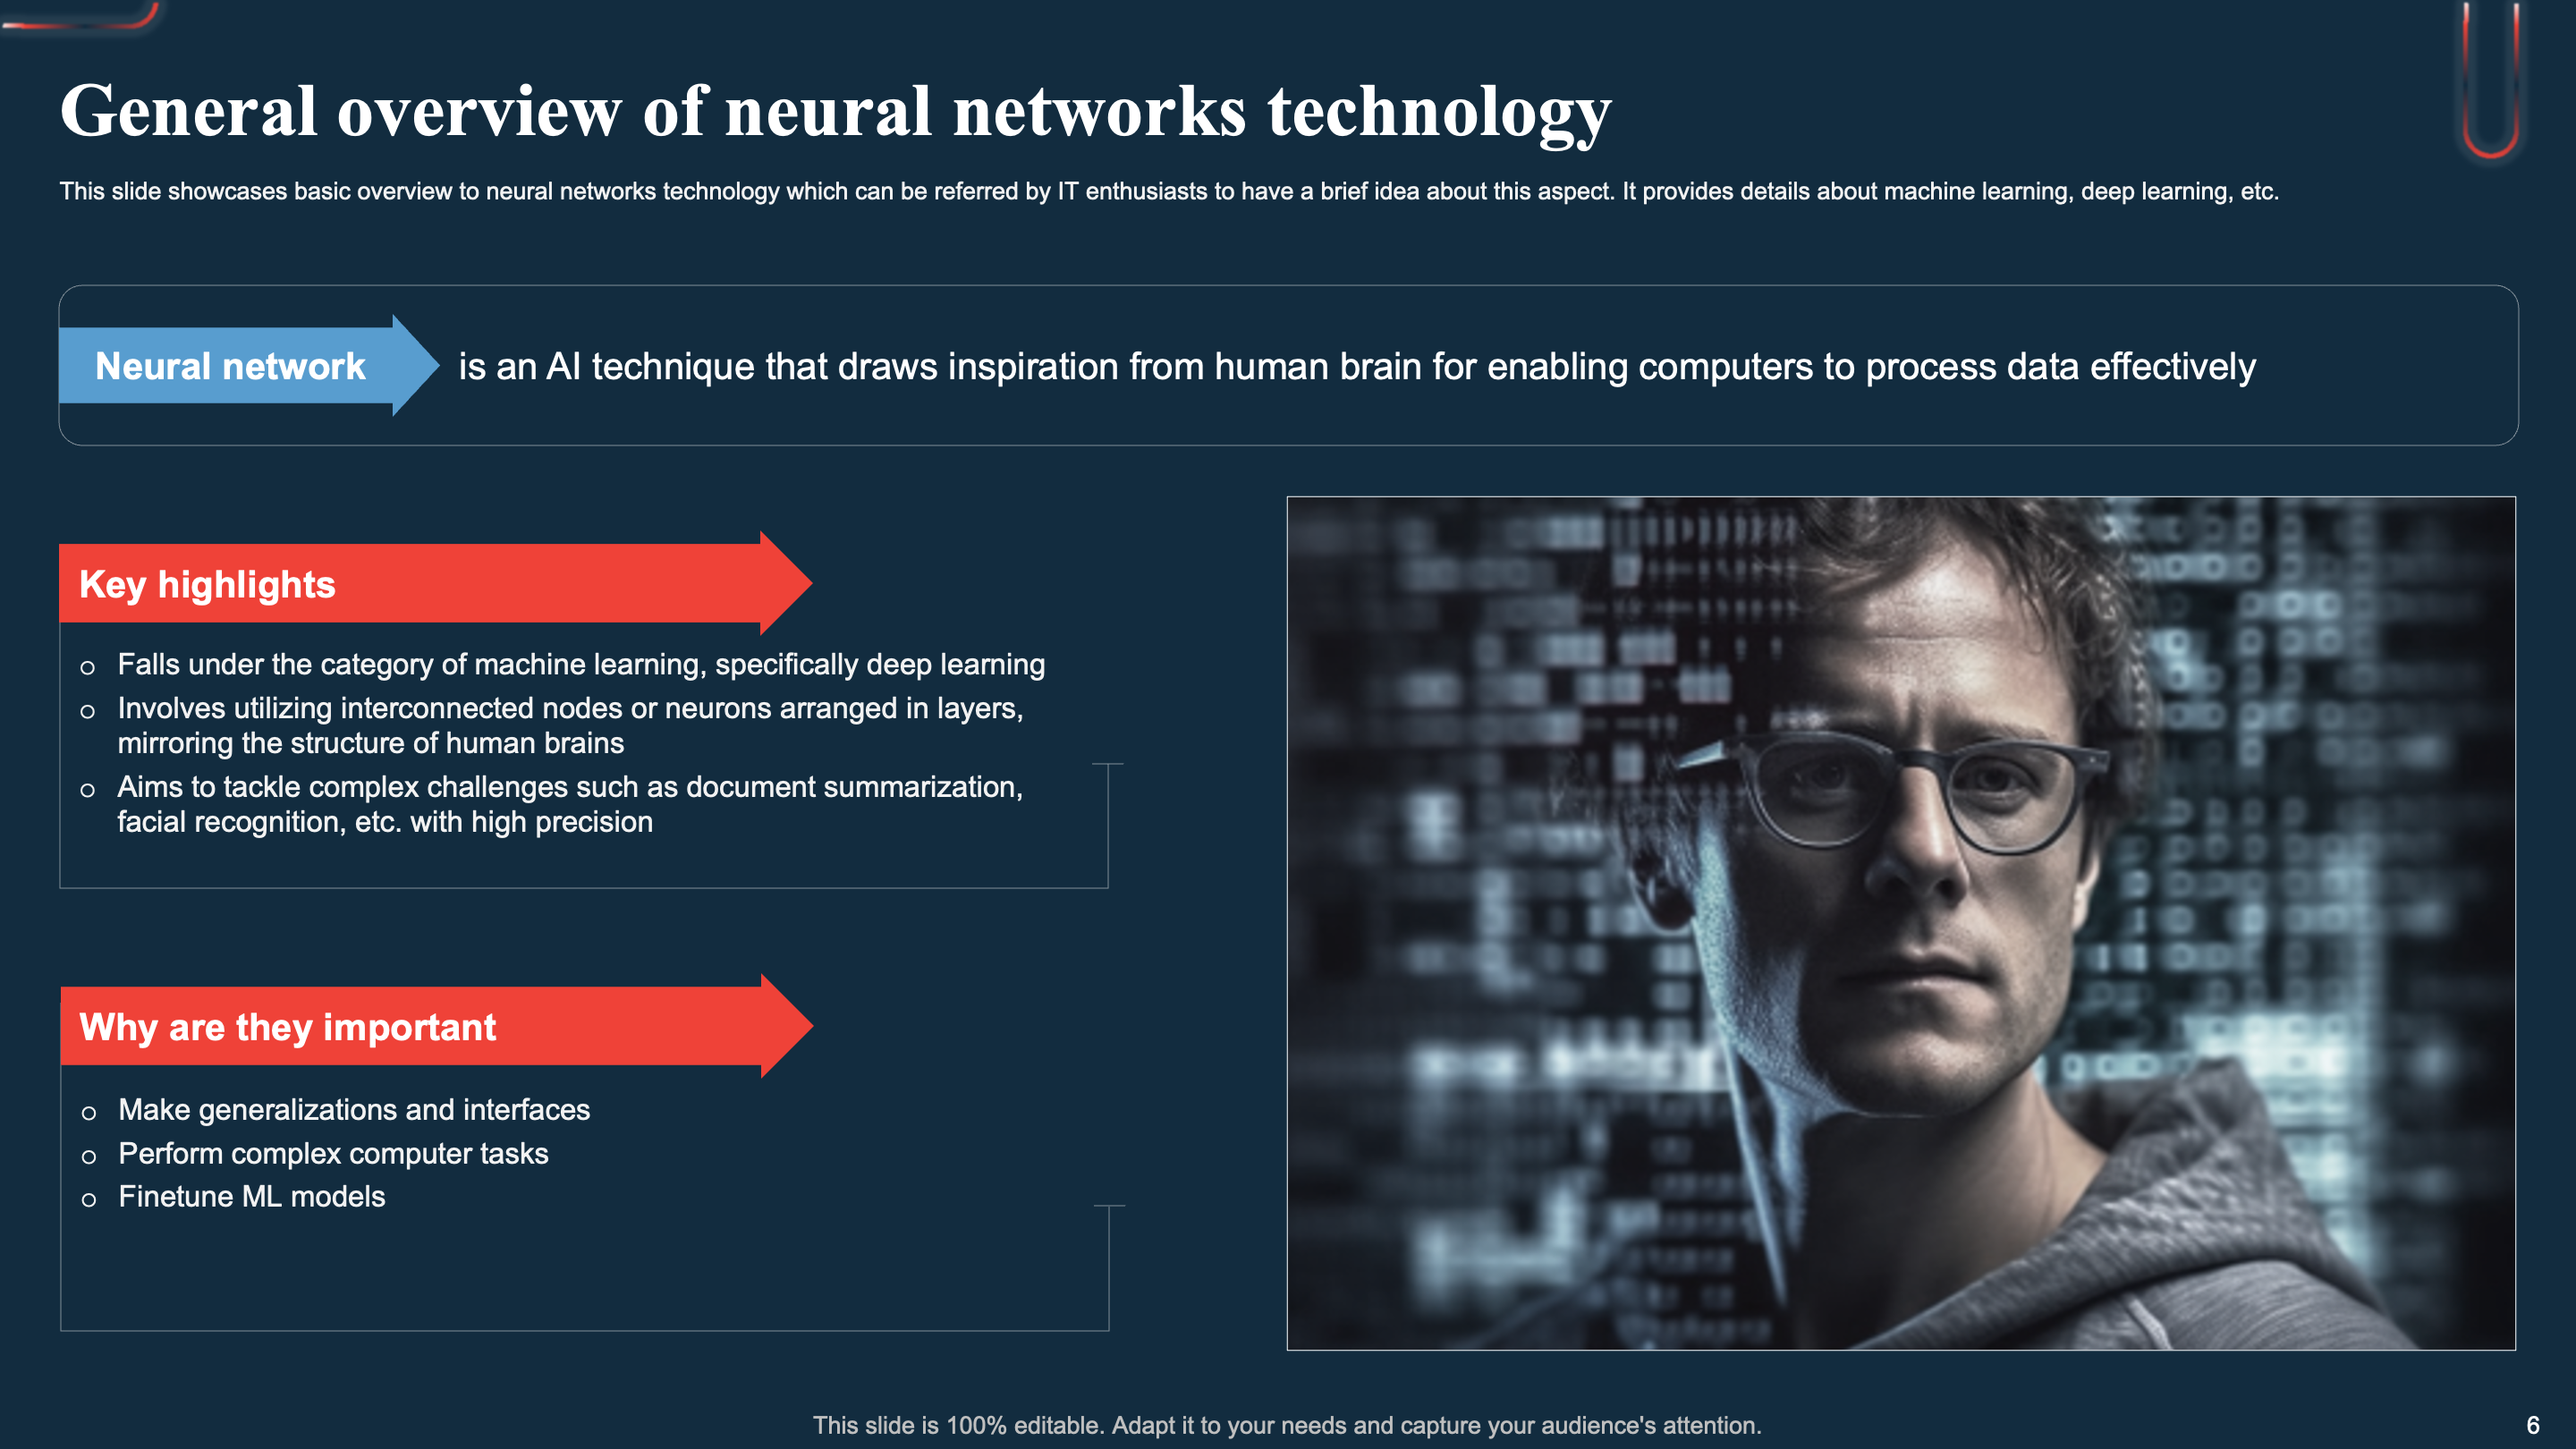 General Overview of Neural Networks Technology